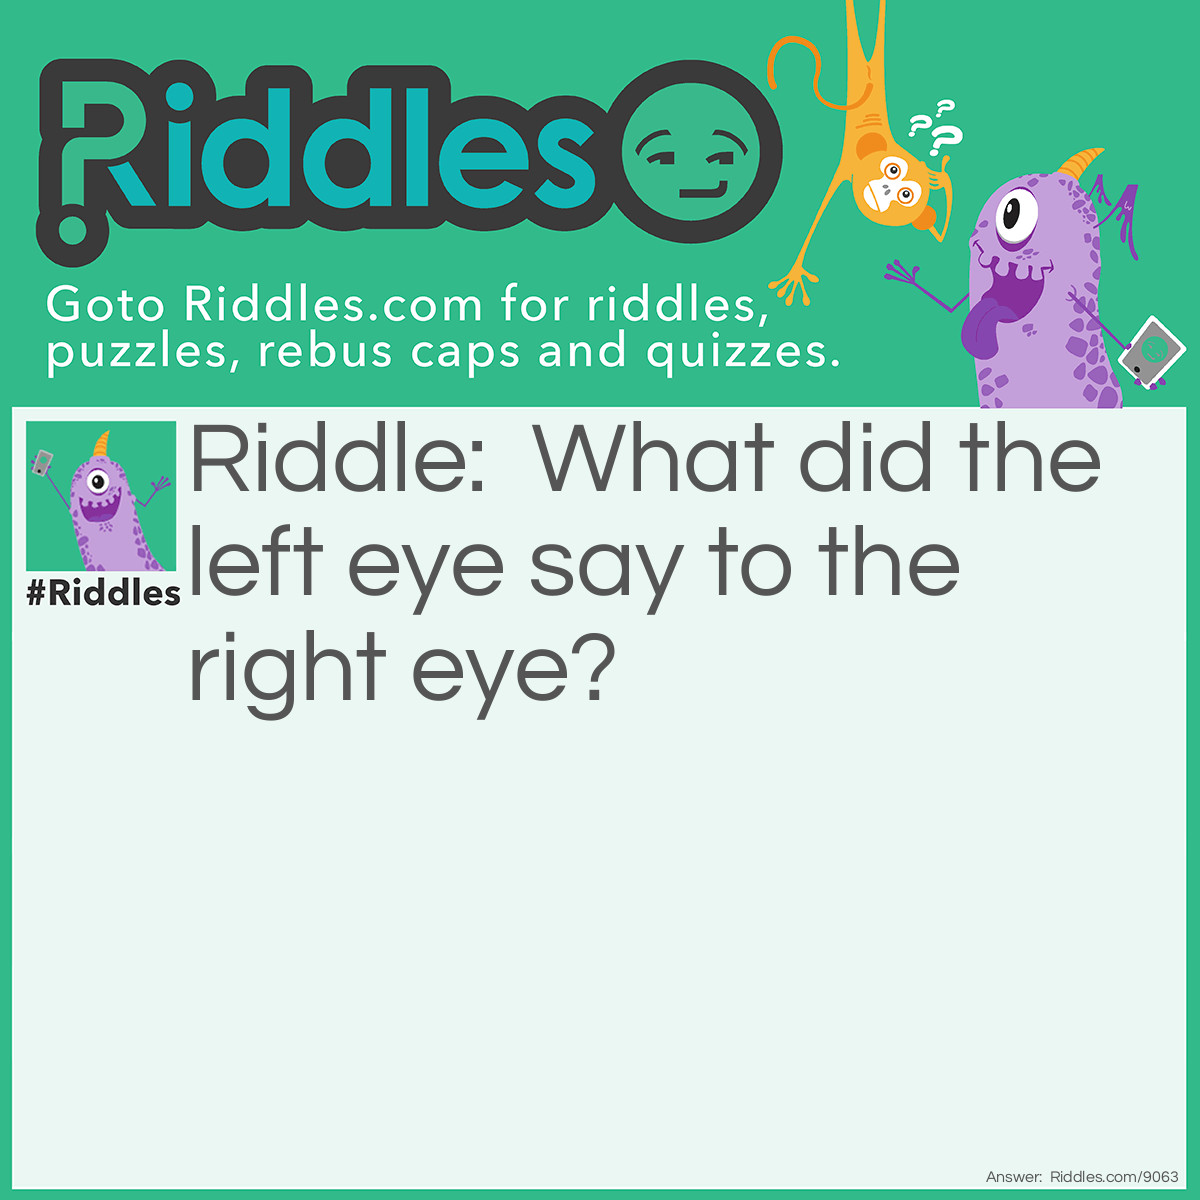 Riddle: What did the left eye say to the right eye? Answer: Between us, something smells.